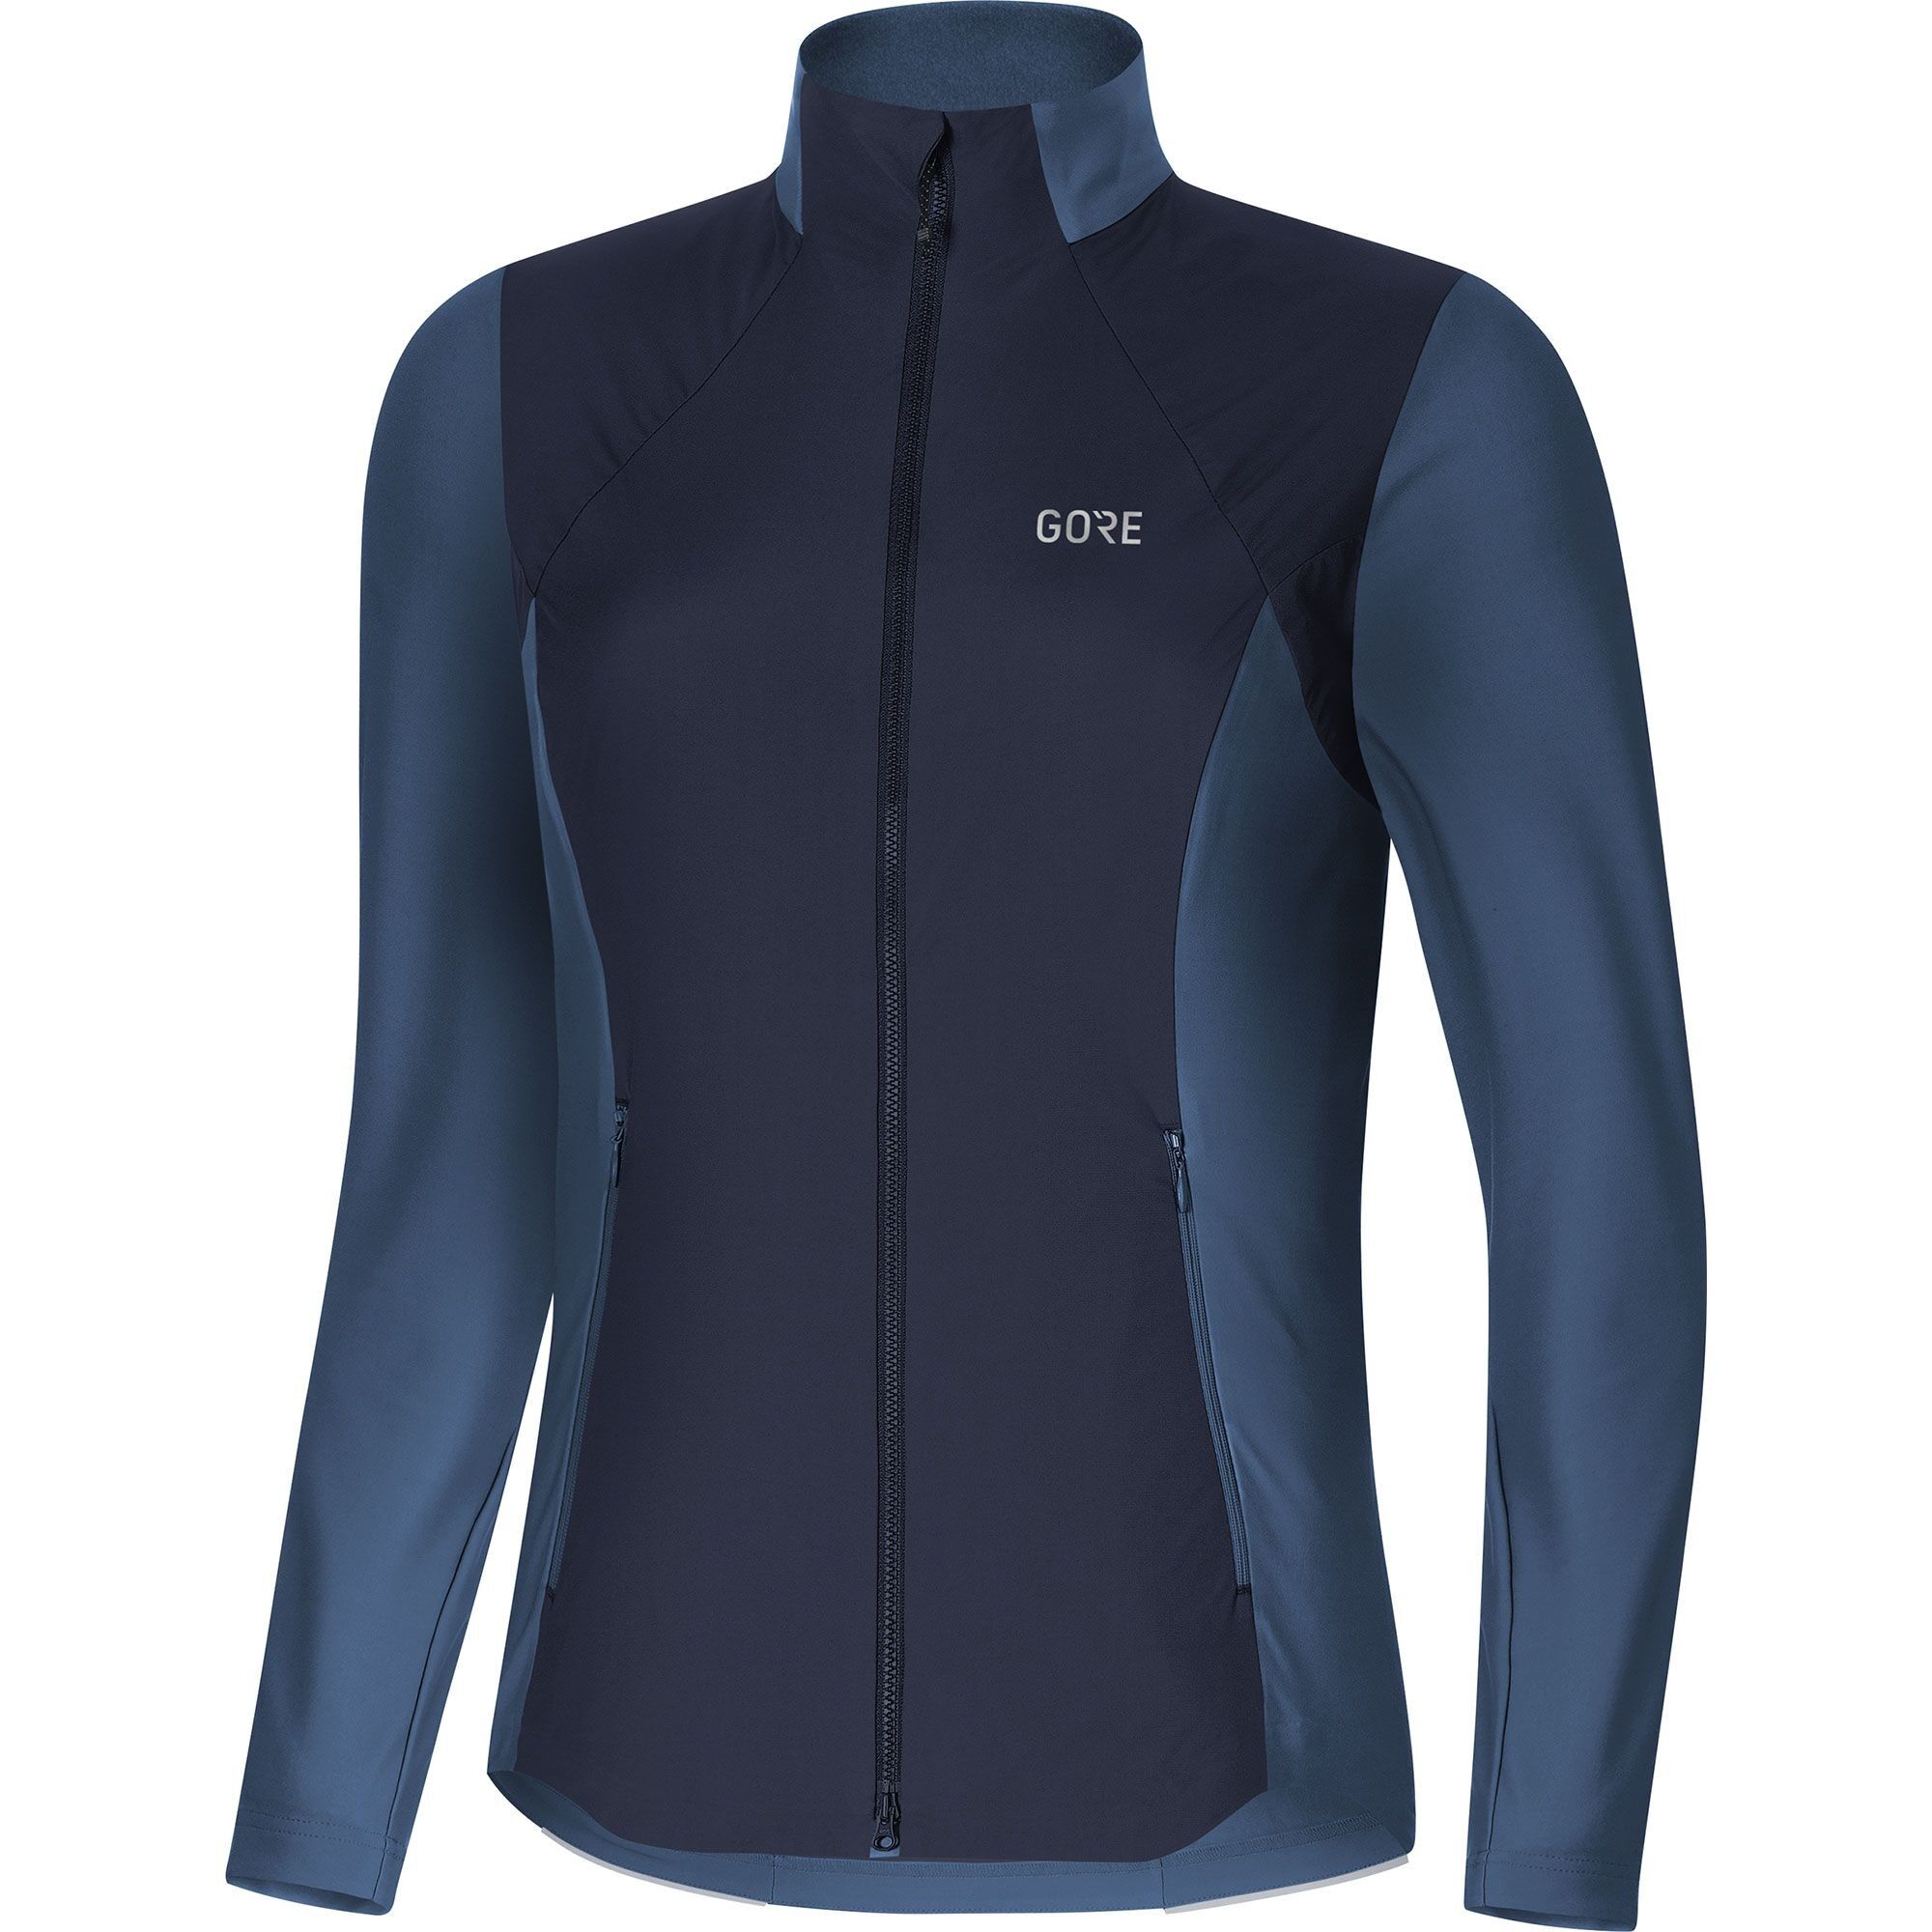 Gore Wear R5 Windstopper Long Sleeve Shirt - Giacca a vento - Donna